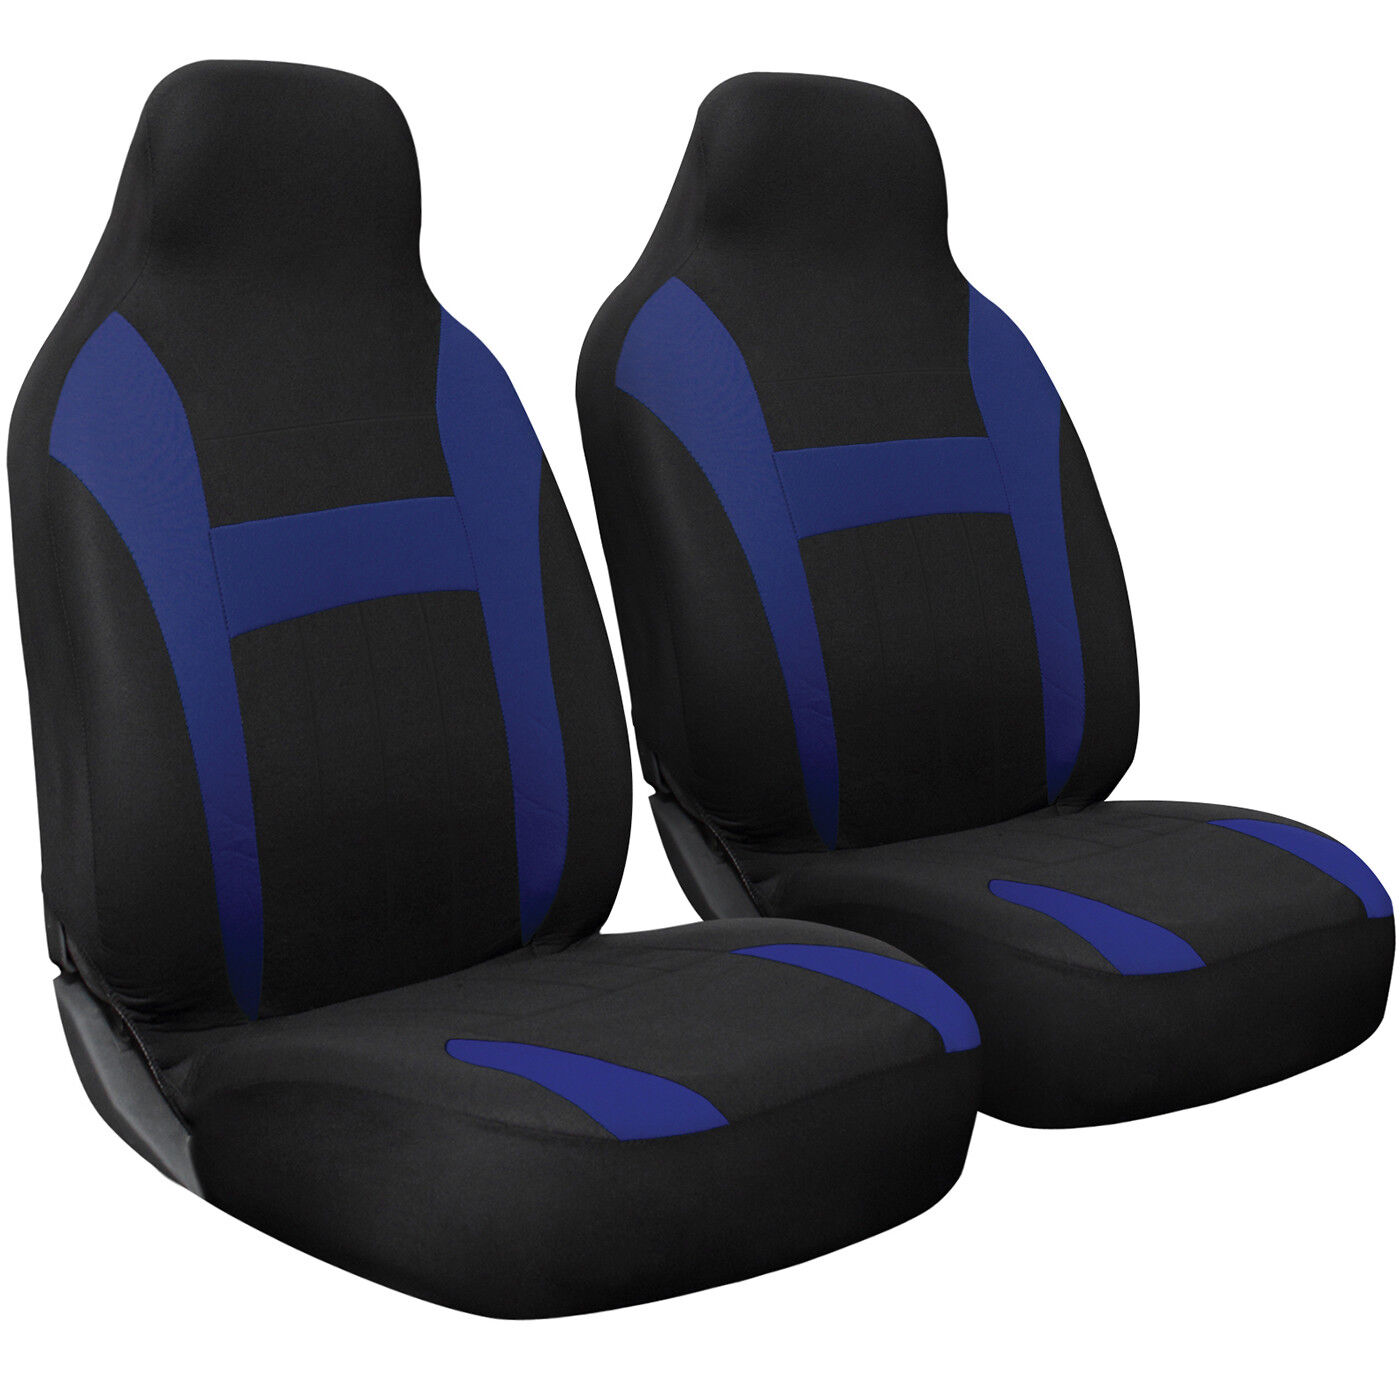 Seat Cover Set Front Integrated Bucket for Car Truck SUV - 2pc Blue & Black